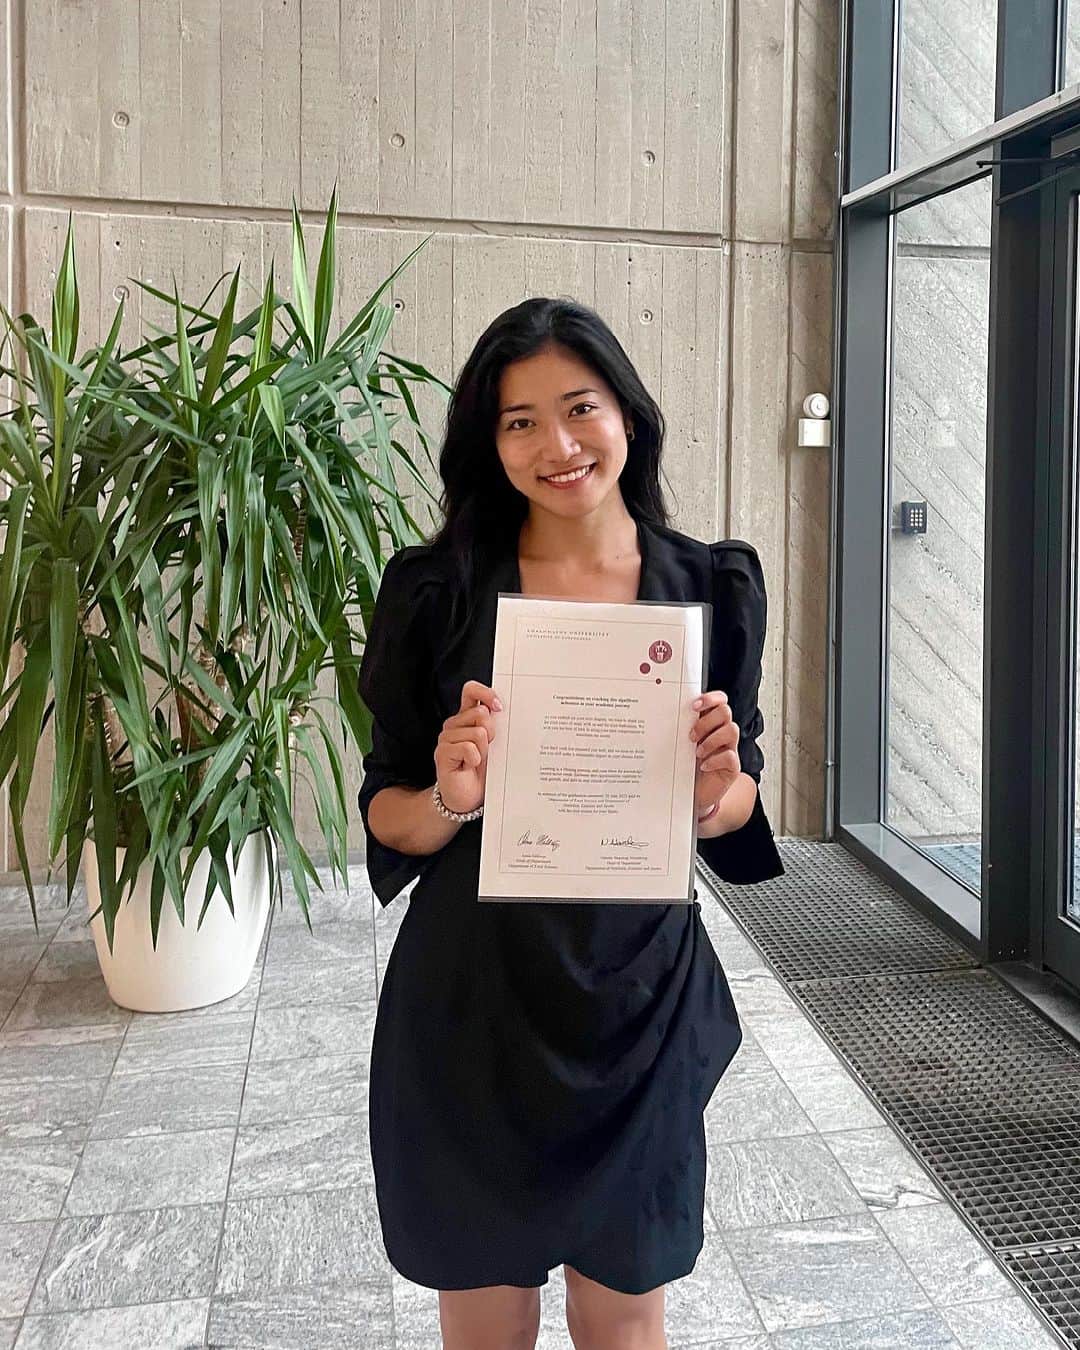 大野南香さんのインスタグラム写真 - (大野南香Instagram)「*June 26. 2023. Graduation.  Officially I've graduated from a master's program from university of copenhagen after two years!  During this summer after gradation I've looked back this two years so many times (so I was very late to post this). Every time I do, I feel so happy and proud that I came here without knowing anything for the study programme and beyond. The new life, new location, new culture, new people, a lot of things were not so easy to understand at the beginning I have cried countless times these years but at the same time feeling stronger in and out everyday.   My journey has just started and still excitedly ongoing ❤︎   報告遅くなりましたが 2023年6月26日をもちまして コペンハーゲン大学大学院修士課程卒業しました！  卒業してから夏の期間、今までの2年間を何度も振り返っていて、(だからこんなに投稿するの遅くなっちゃった)振り返るたびに、『何も知らないところからのスタートだったけど、来てよかったな。』って幸せな、誇らしい気持ちになった。  来た時から今まで、新生活、新しい文化、わからないことがたくさんあっていろんな感情が生まれたけど、だからこそ学べたことがたくさんあるな〜  好きなことを追求する旅はまだまだ始まったばかり！これからも日々の私の何気ない日常を応援してもらえたら嬉しいです😚  #everydayhappy ☺︎ #universityofcopenhagen」8月29日 19時55分 - minaka_official